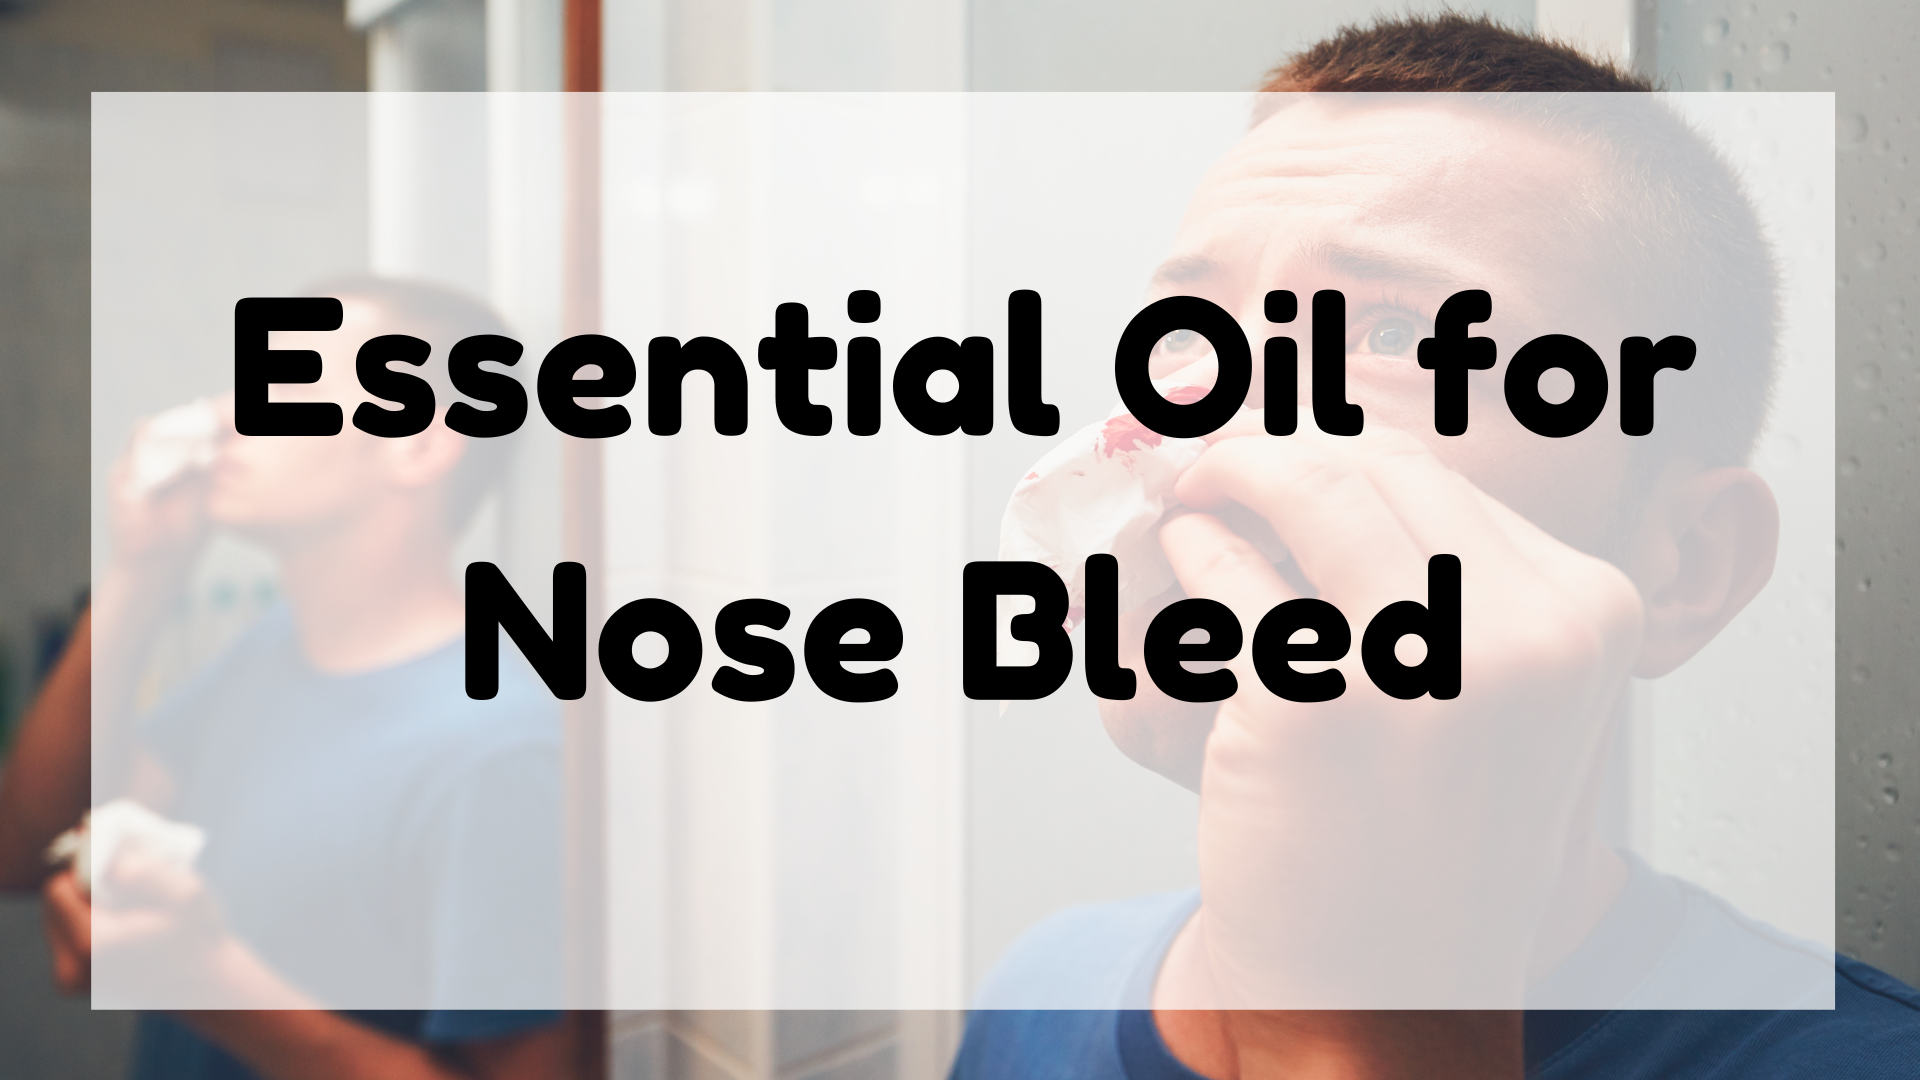 Essential Oil for Nose Bleed featured image